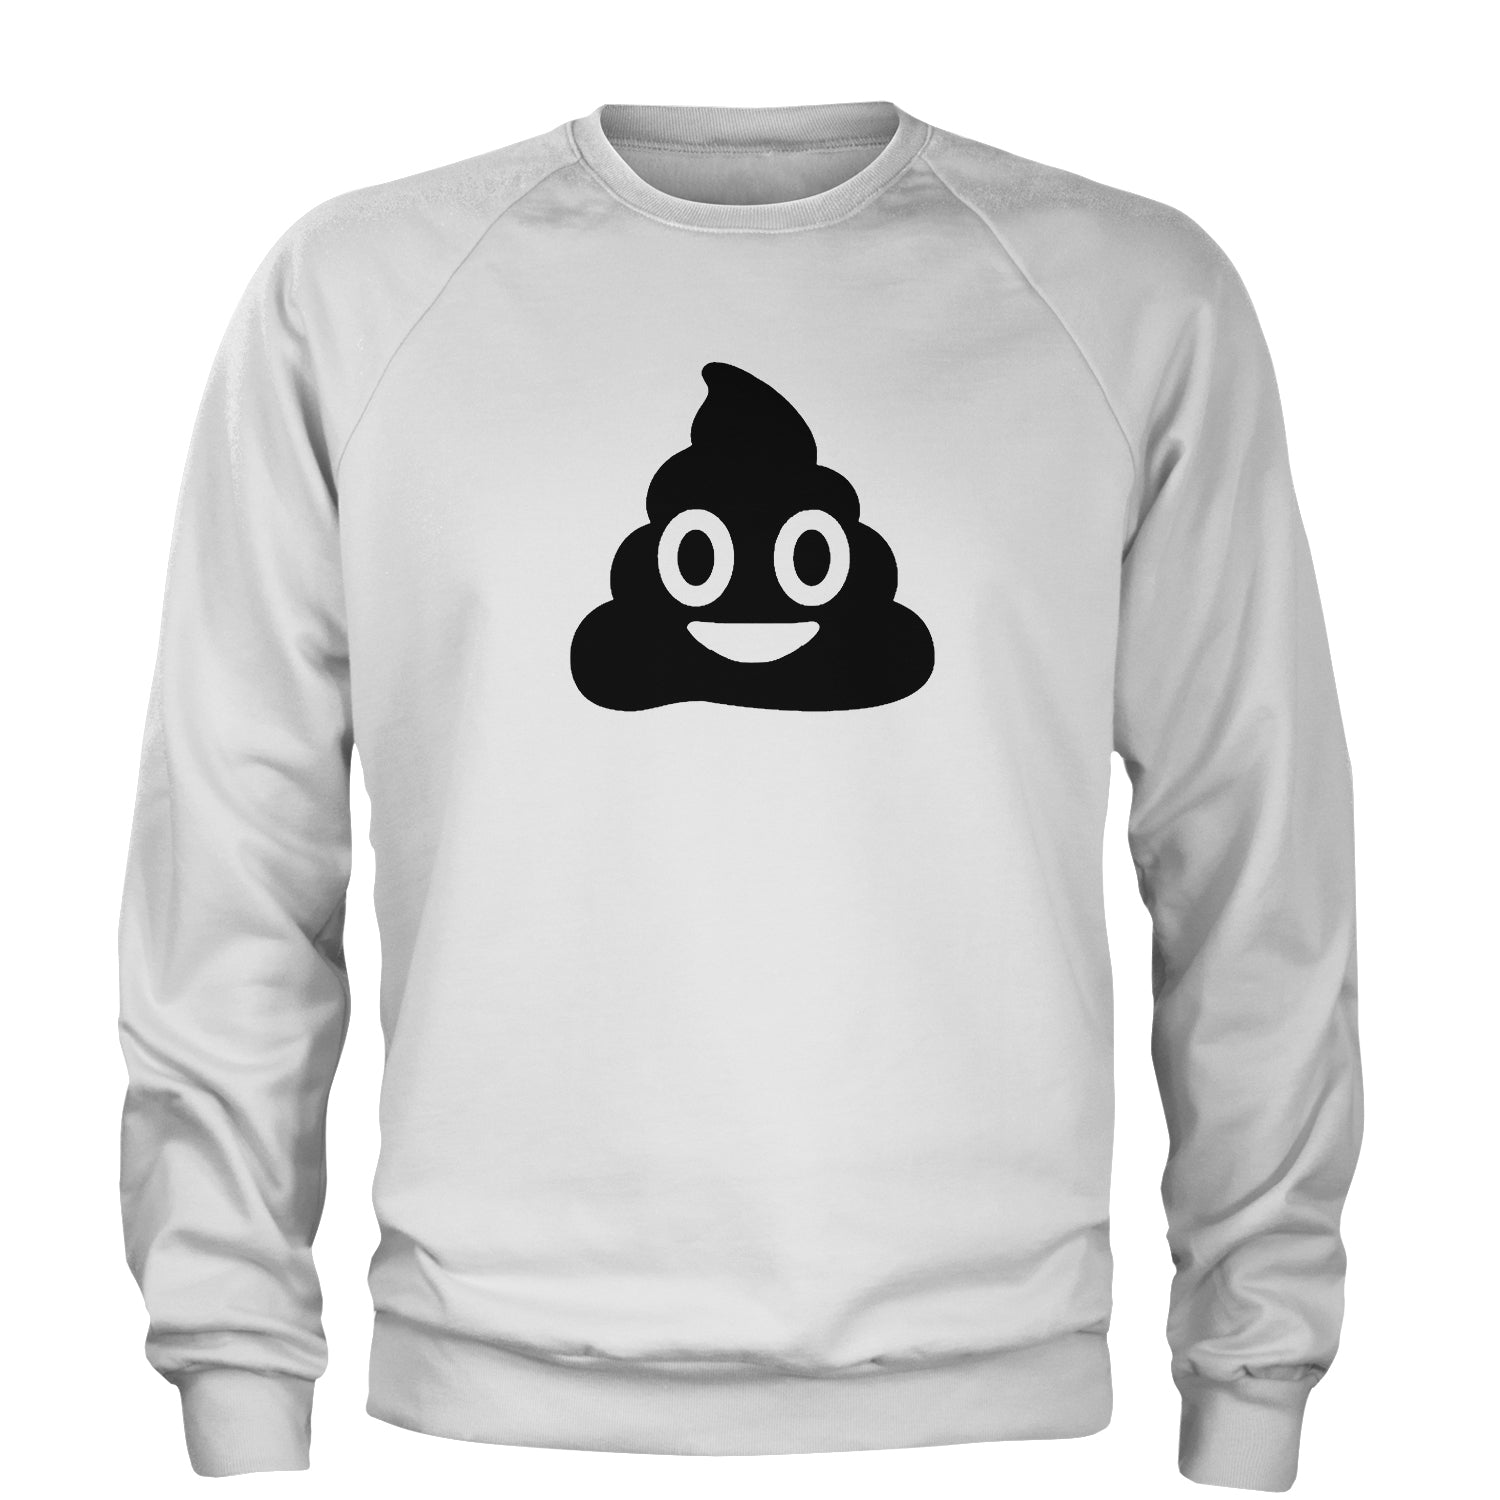 Emoticon Poop Face Smile Face Adult Crewneck Sweatshirt cosplay, costume, dress, emoji, emote, face, halloween, smiley, up, yellow by Expression Tees